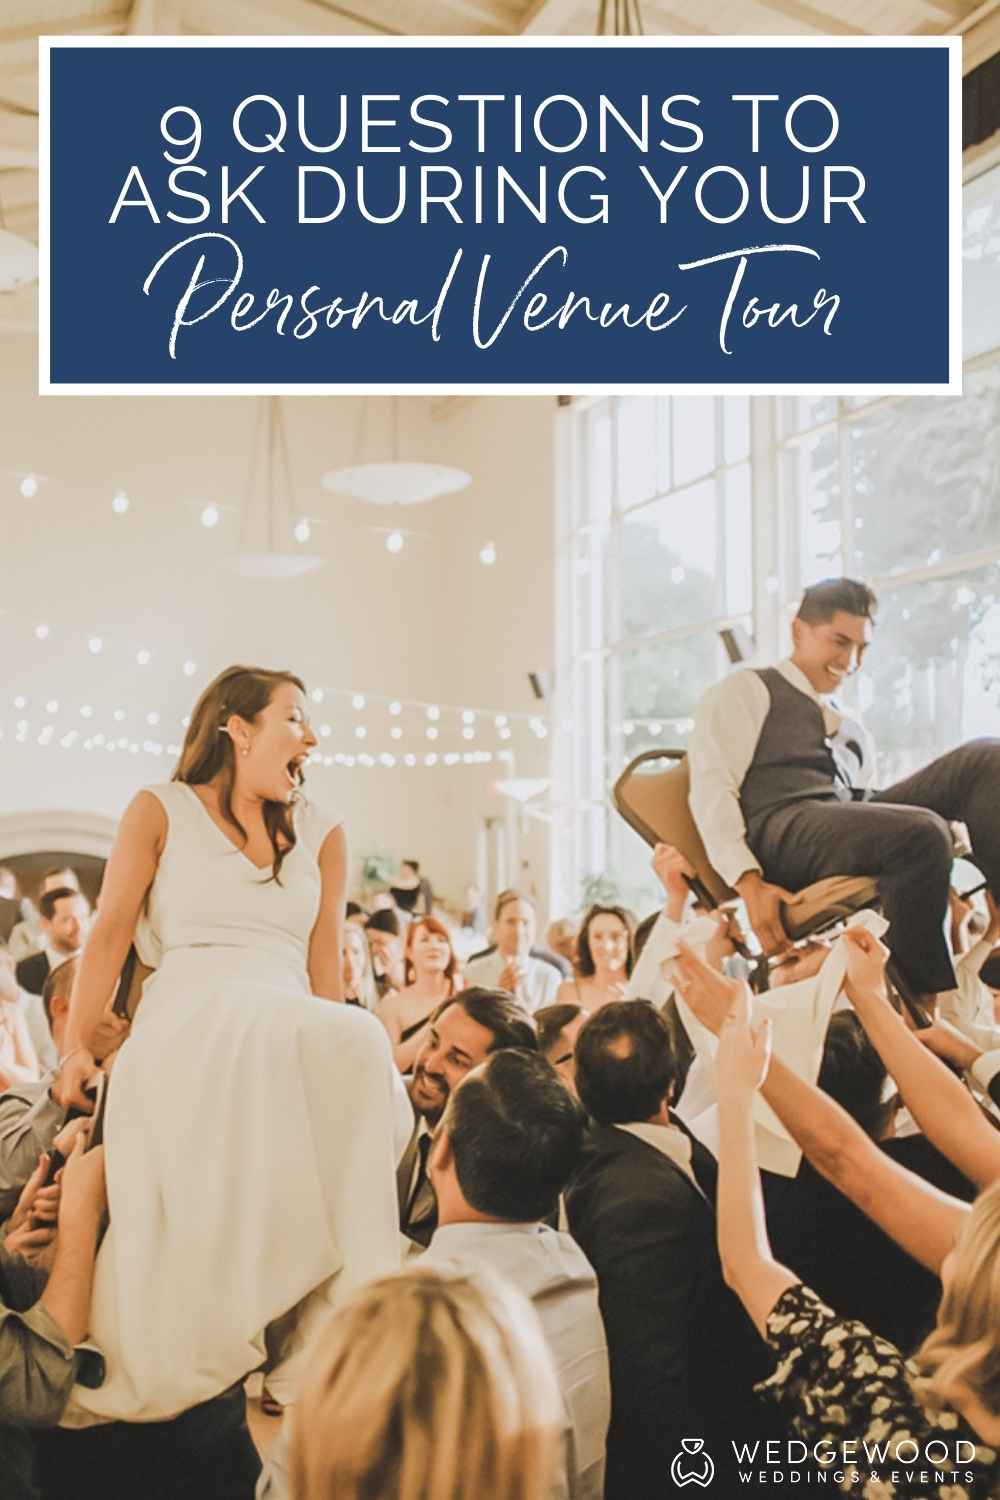 Need help finding a wedding venue? Not sure where to start? Read these nine critical questions you need to ask before or during your venue tour. Find the right ceremony and reception space easily. Unbiased help for newly engaged couples. How to shortlist venues, how to select vendors, downloadable checklist!